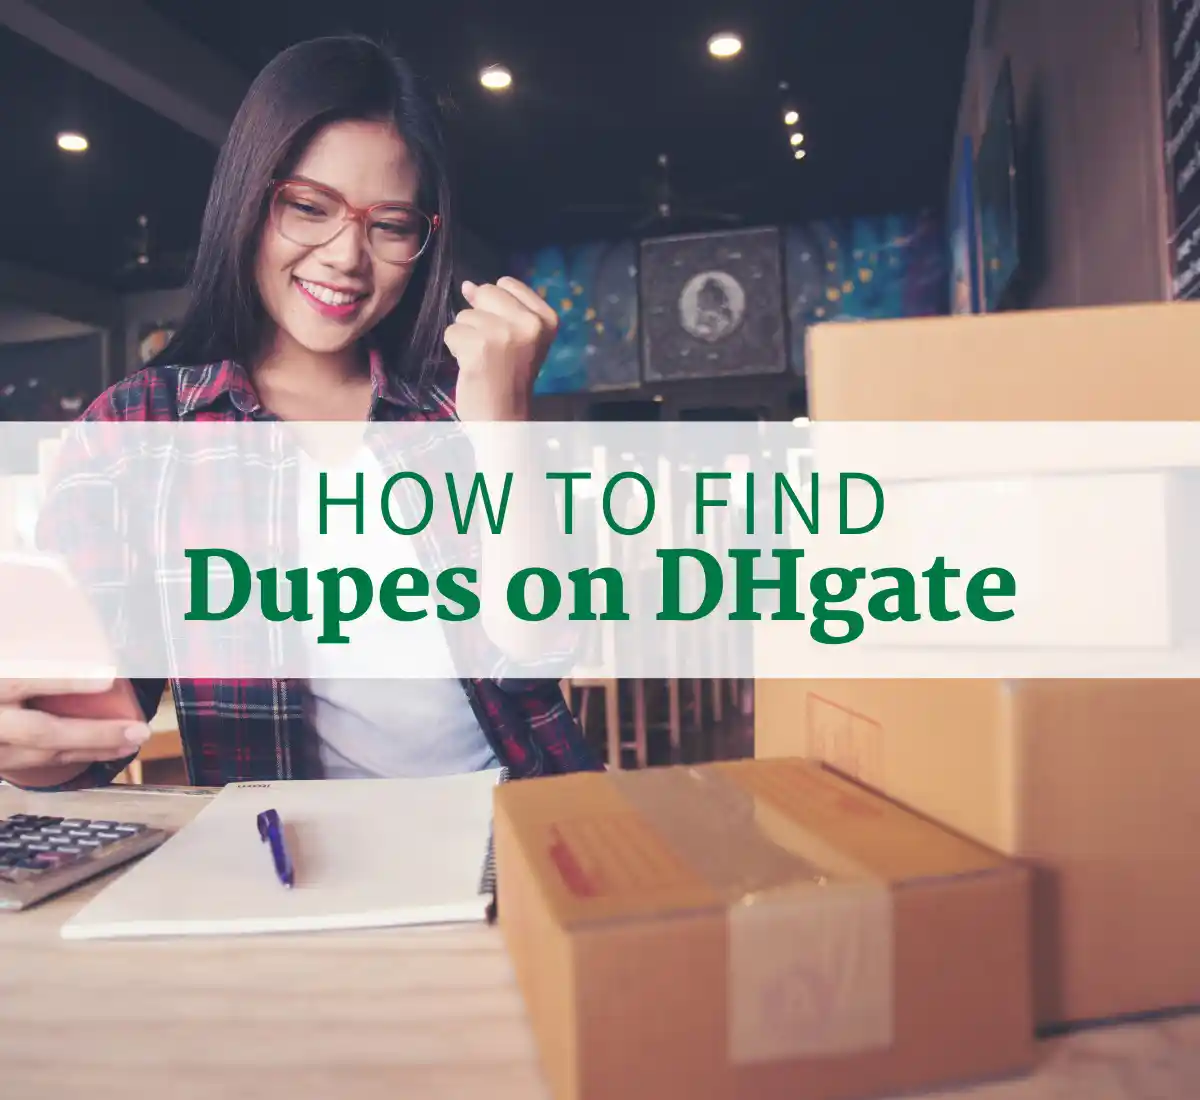 How to find dupes on dhgate (step-by-step)